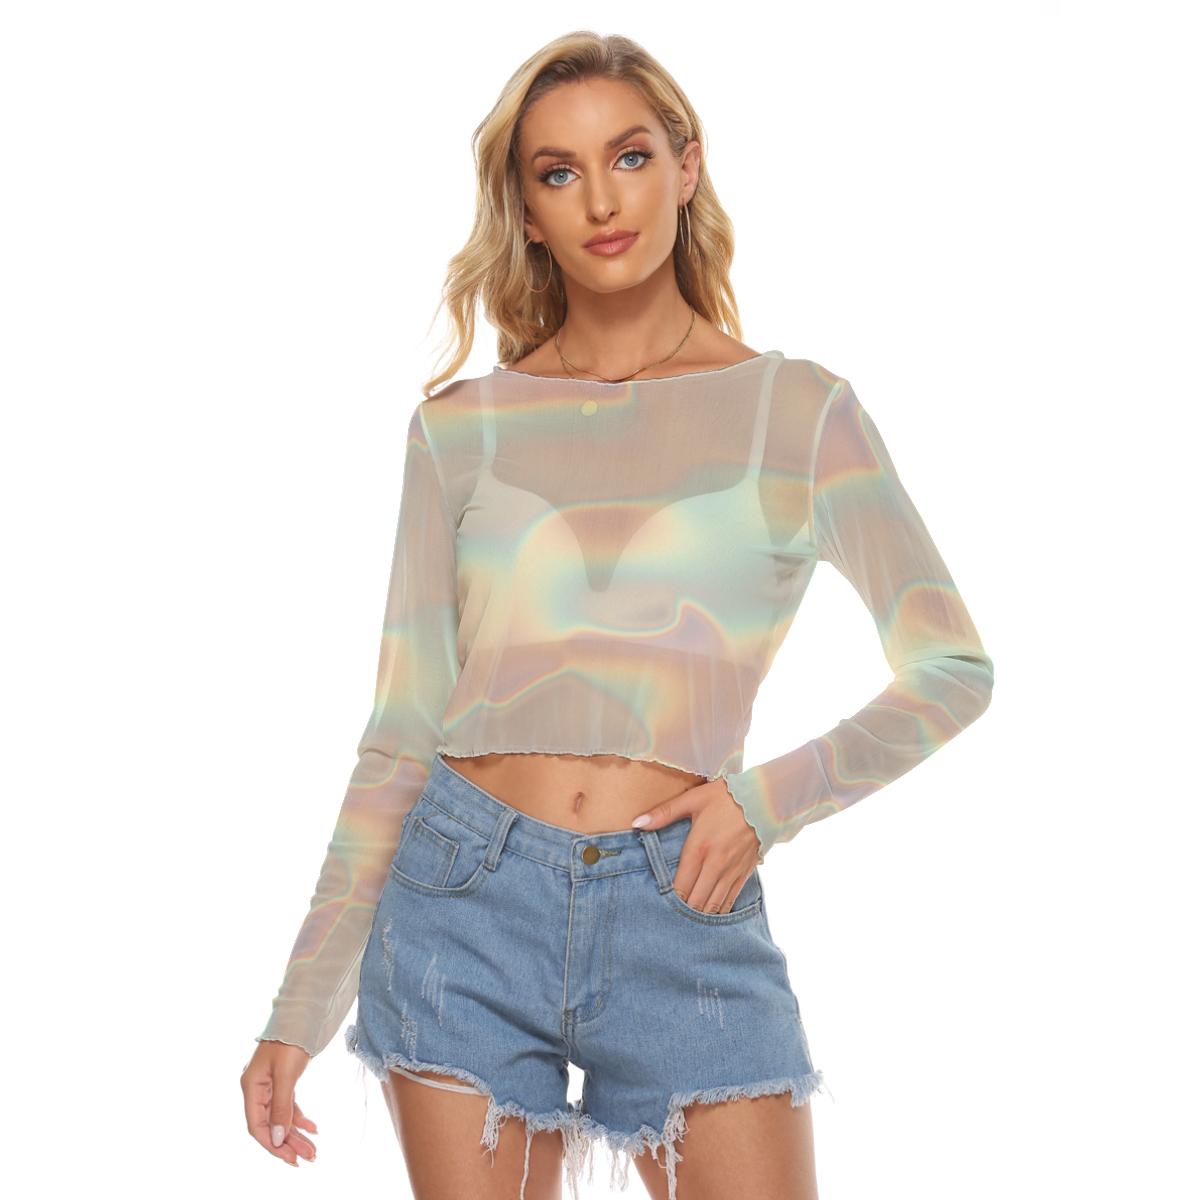 Ombre Iridescence Holographic Long Sleeves Mesh Top, Ivory Pink